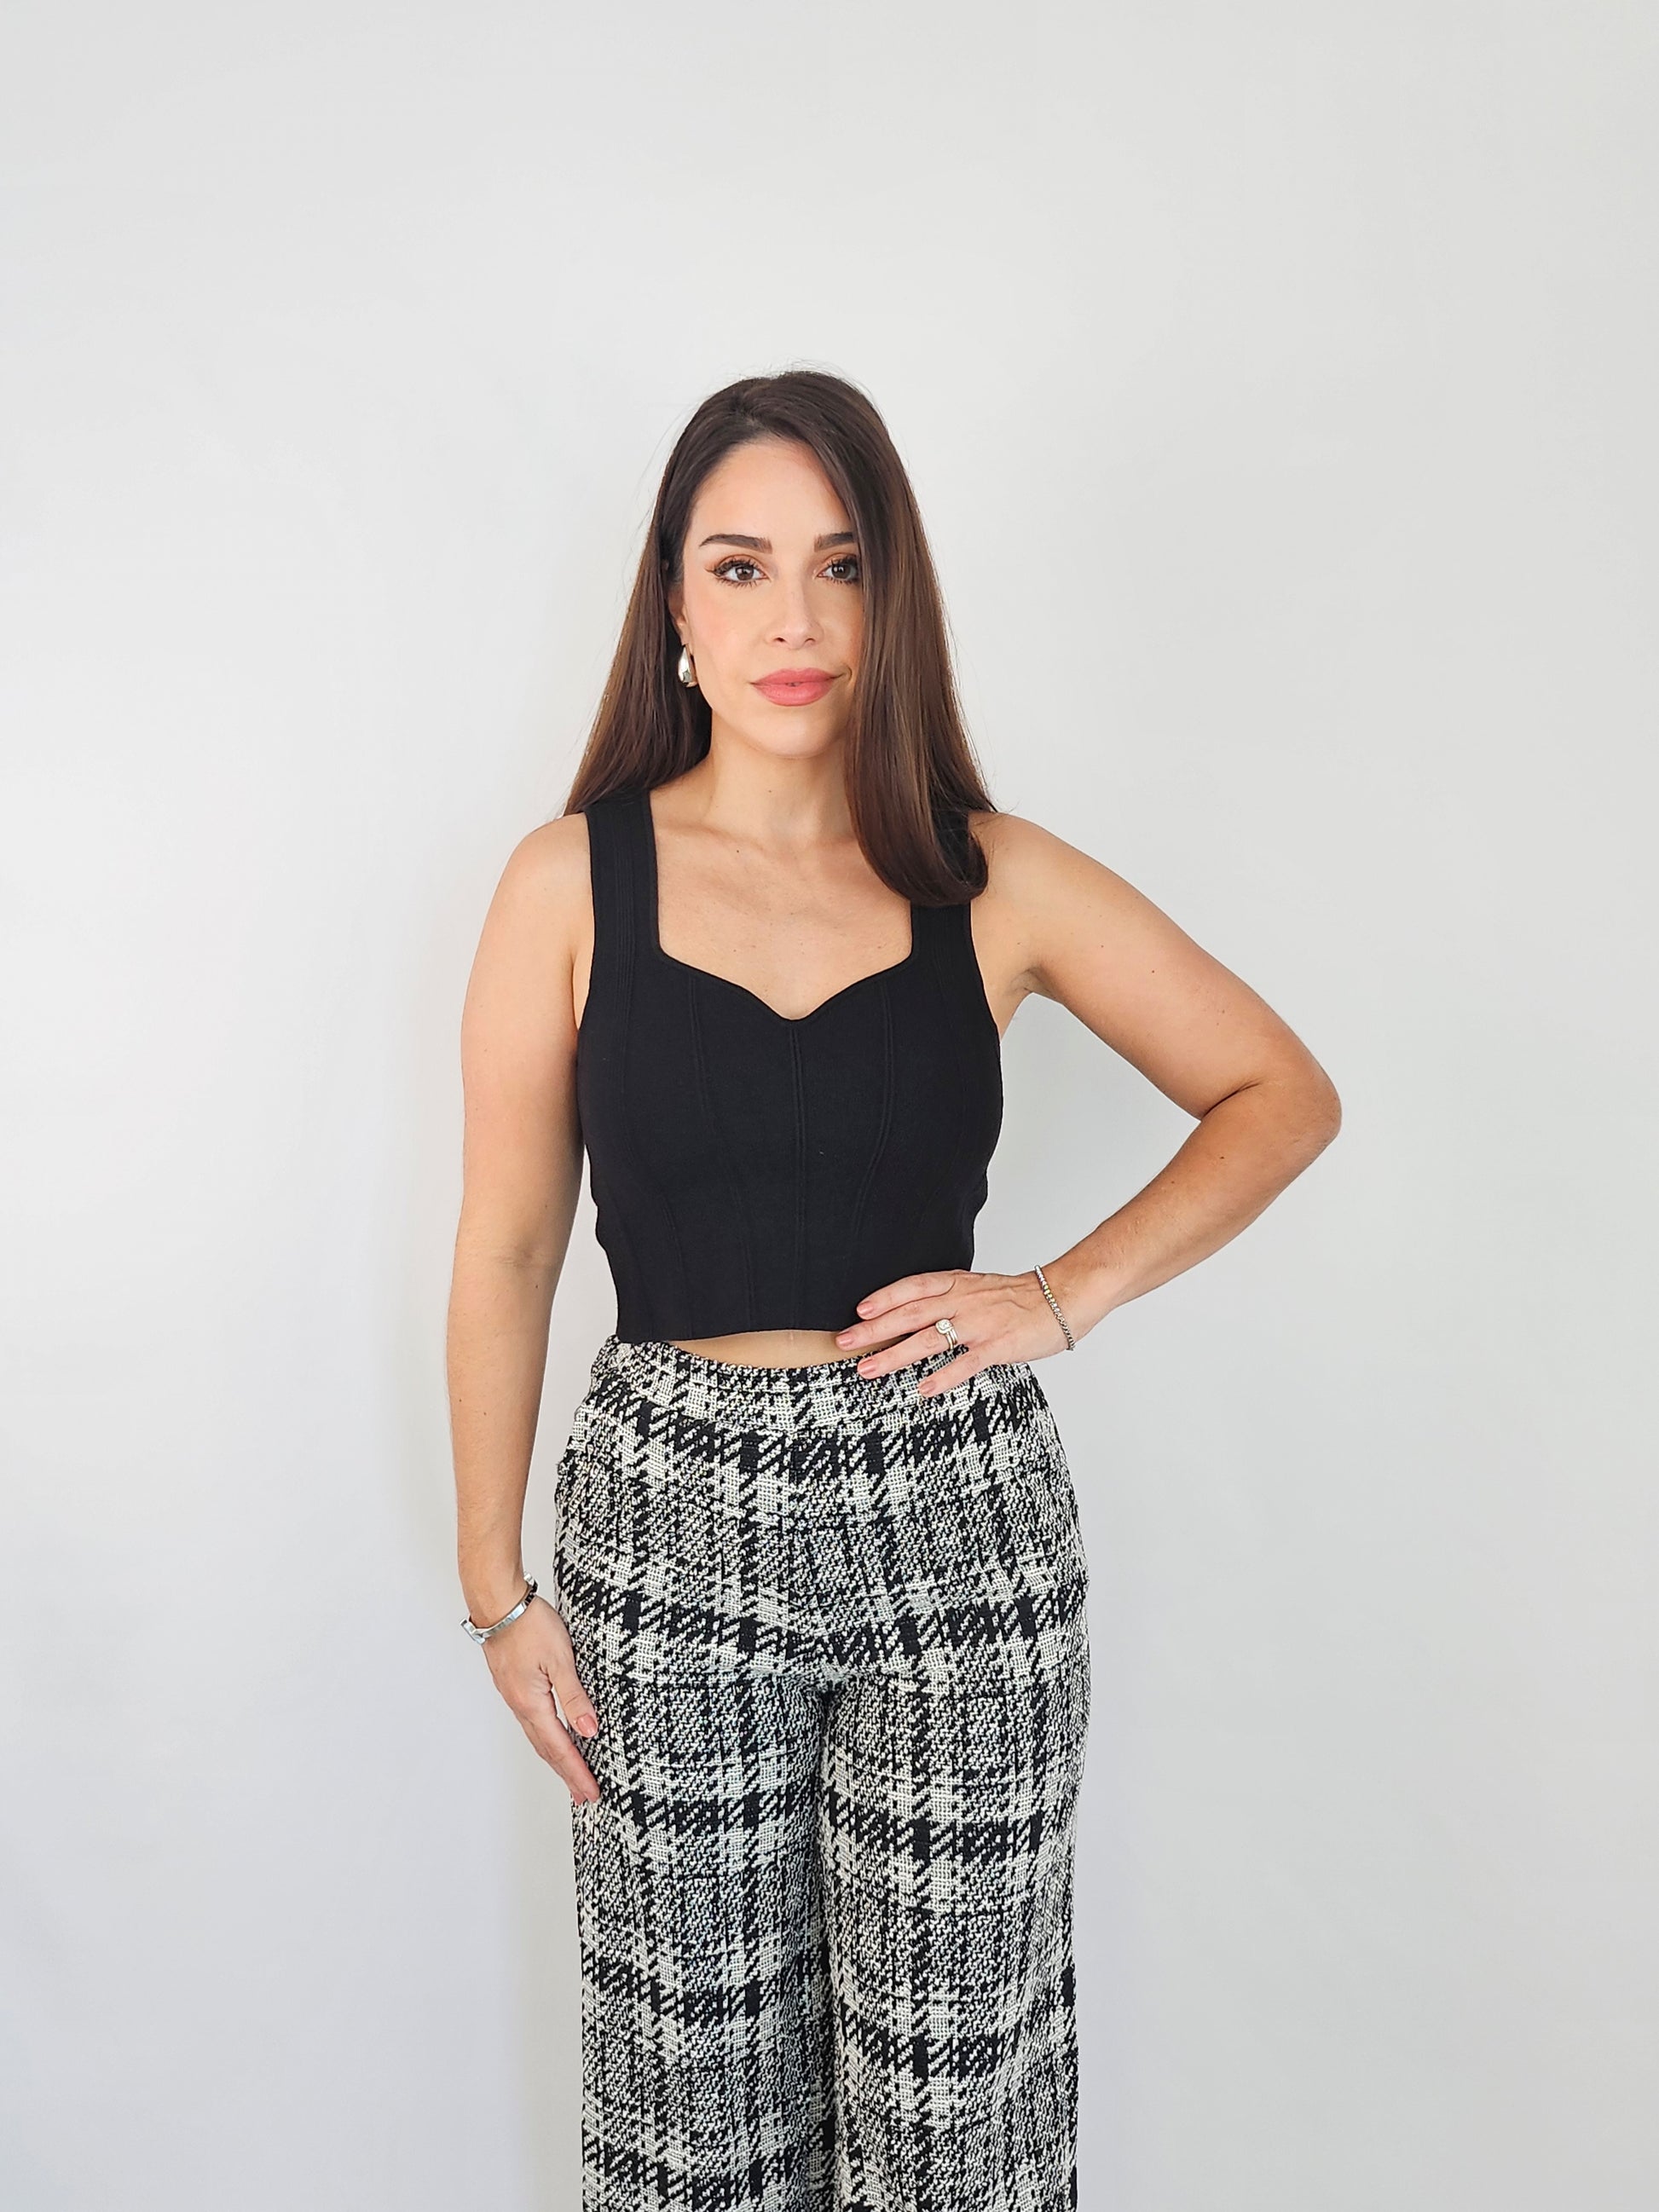 Black knitted crop top perfect to pair with any item in your wardrobe making this a staple piece to have. 